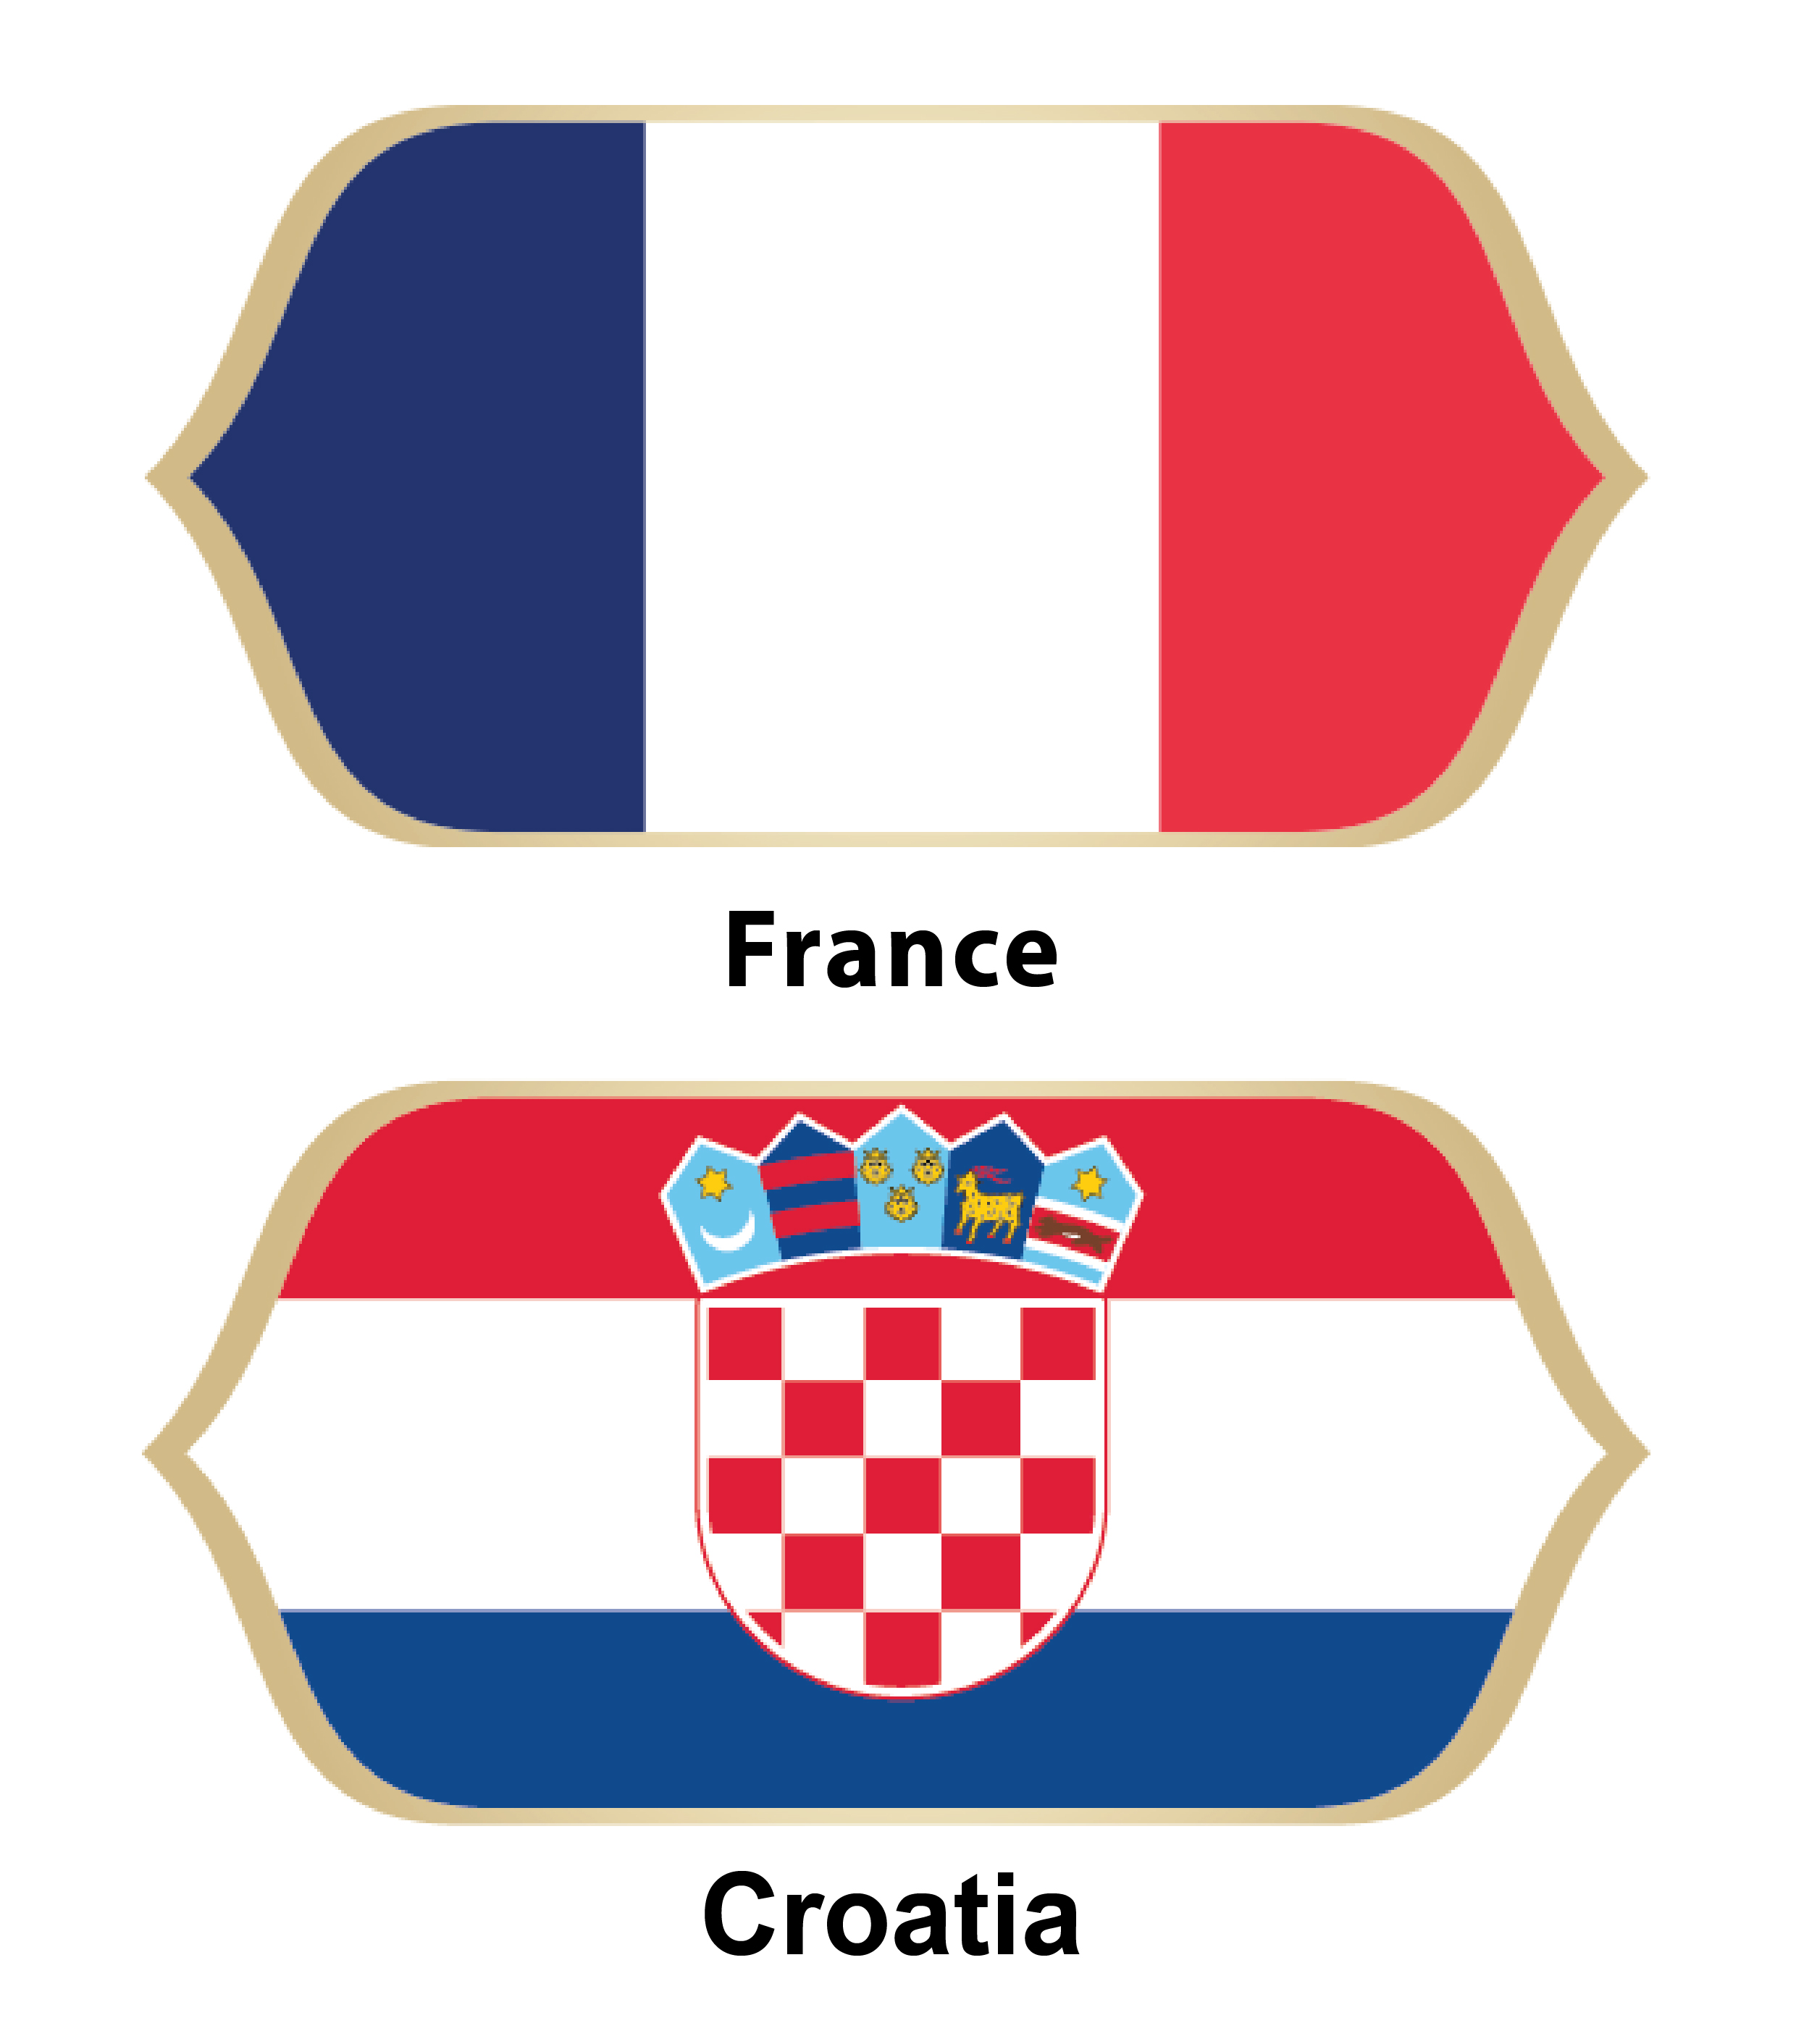 France, Croatia hungry for World Cup win                                                                                                                                                                                                                  